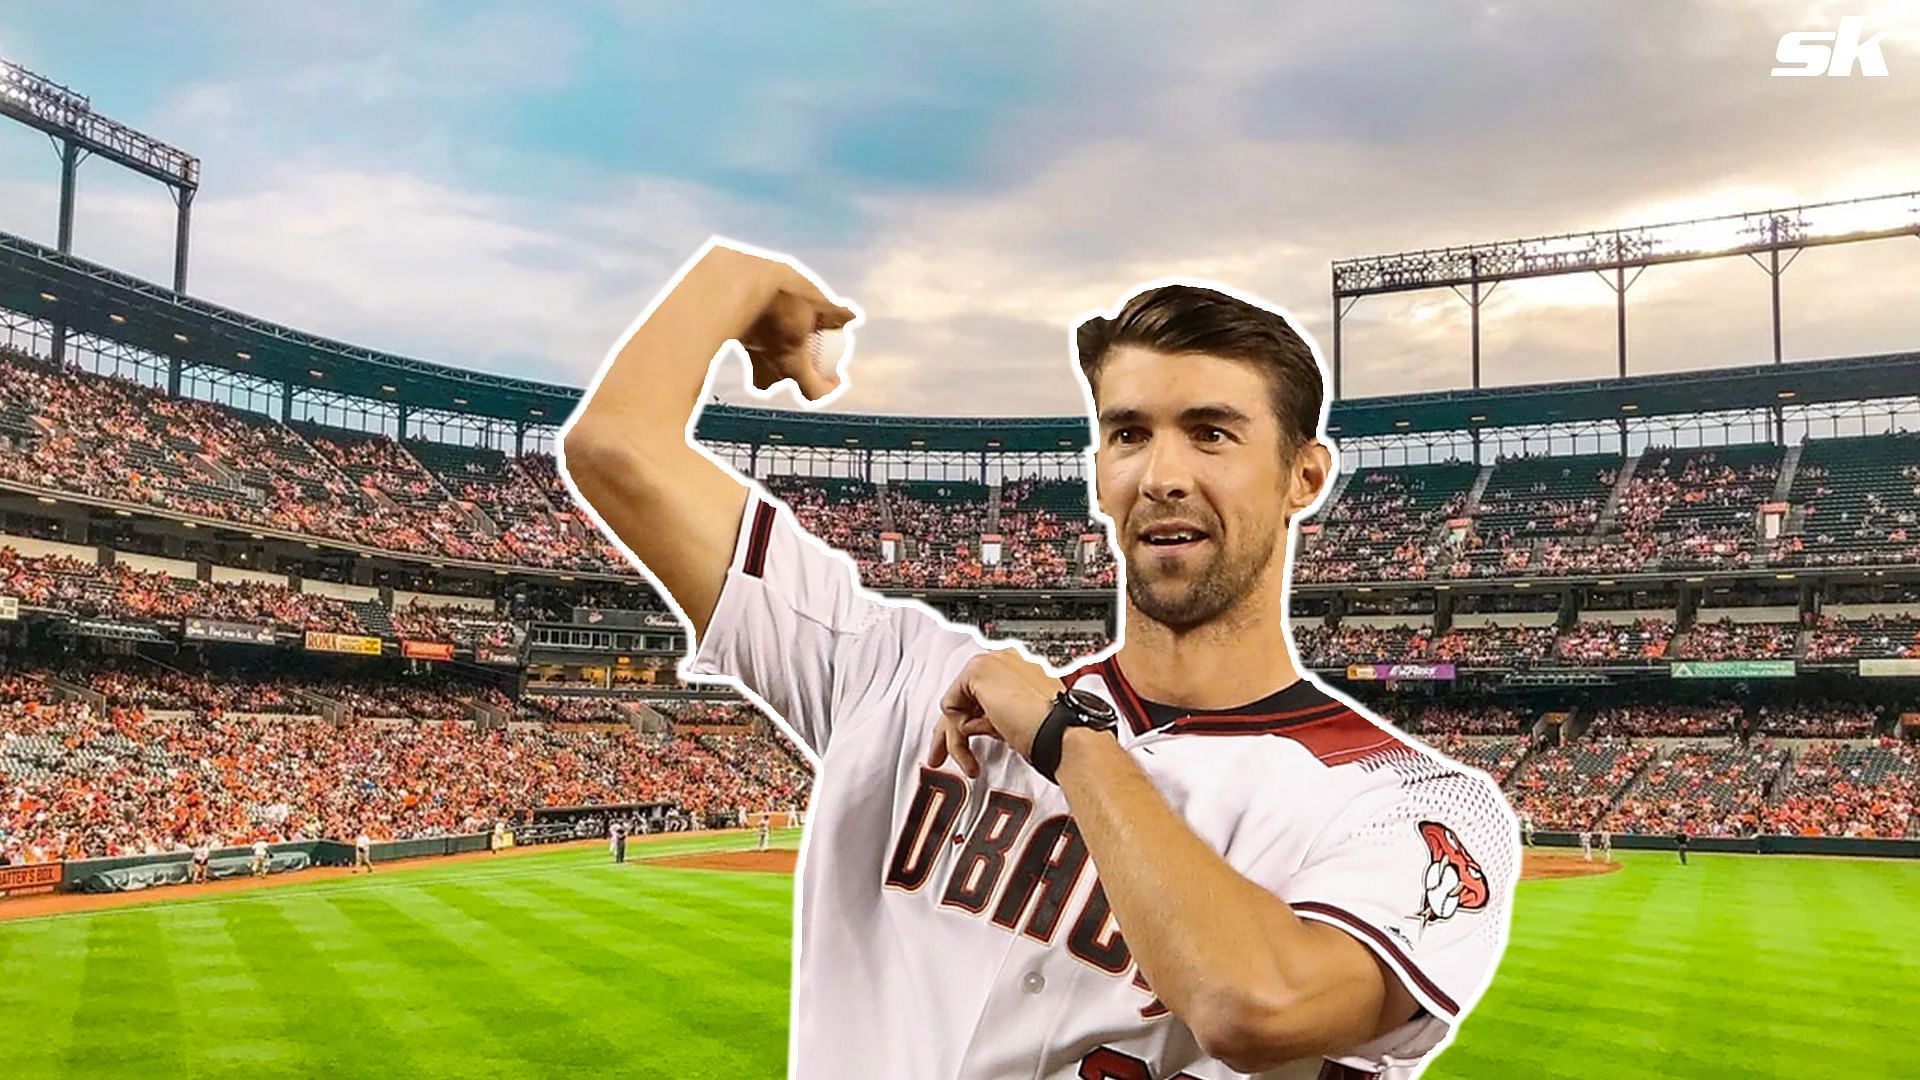 Michael Phelps will be throwing out the first pitch prior to Game 5 of the NLCS